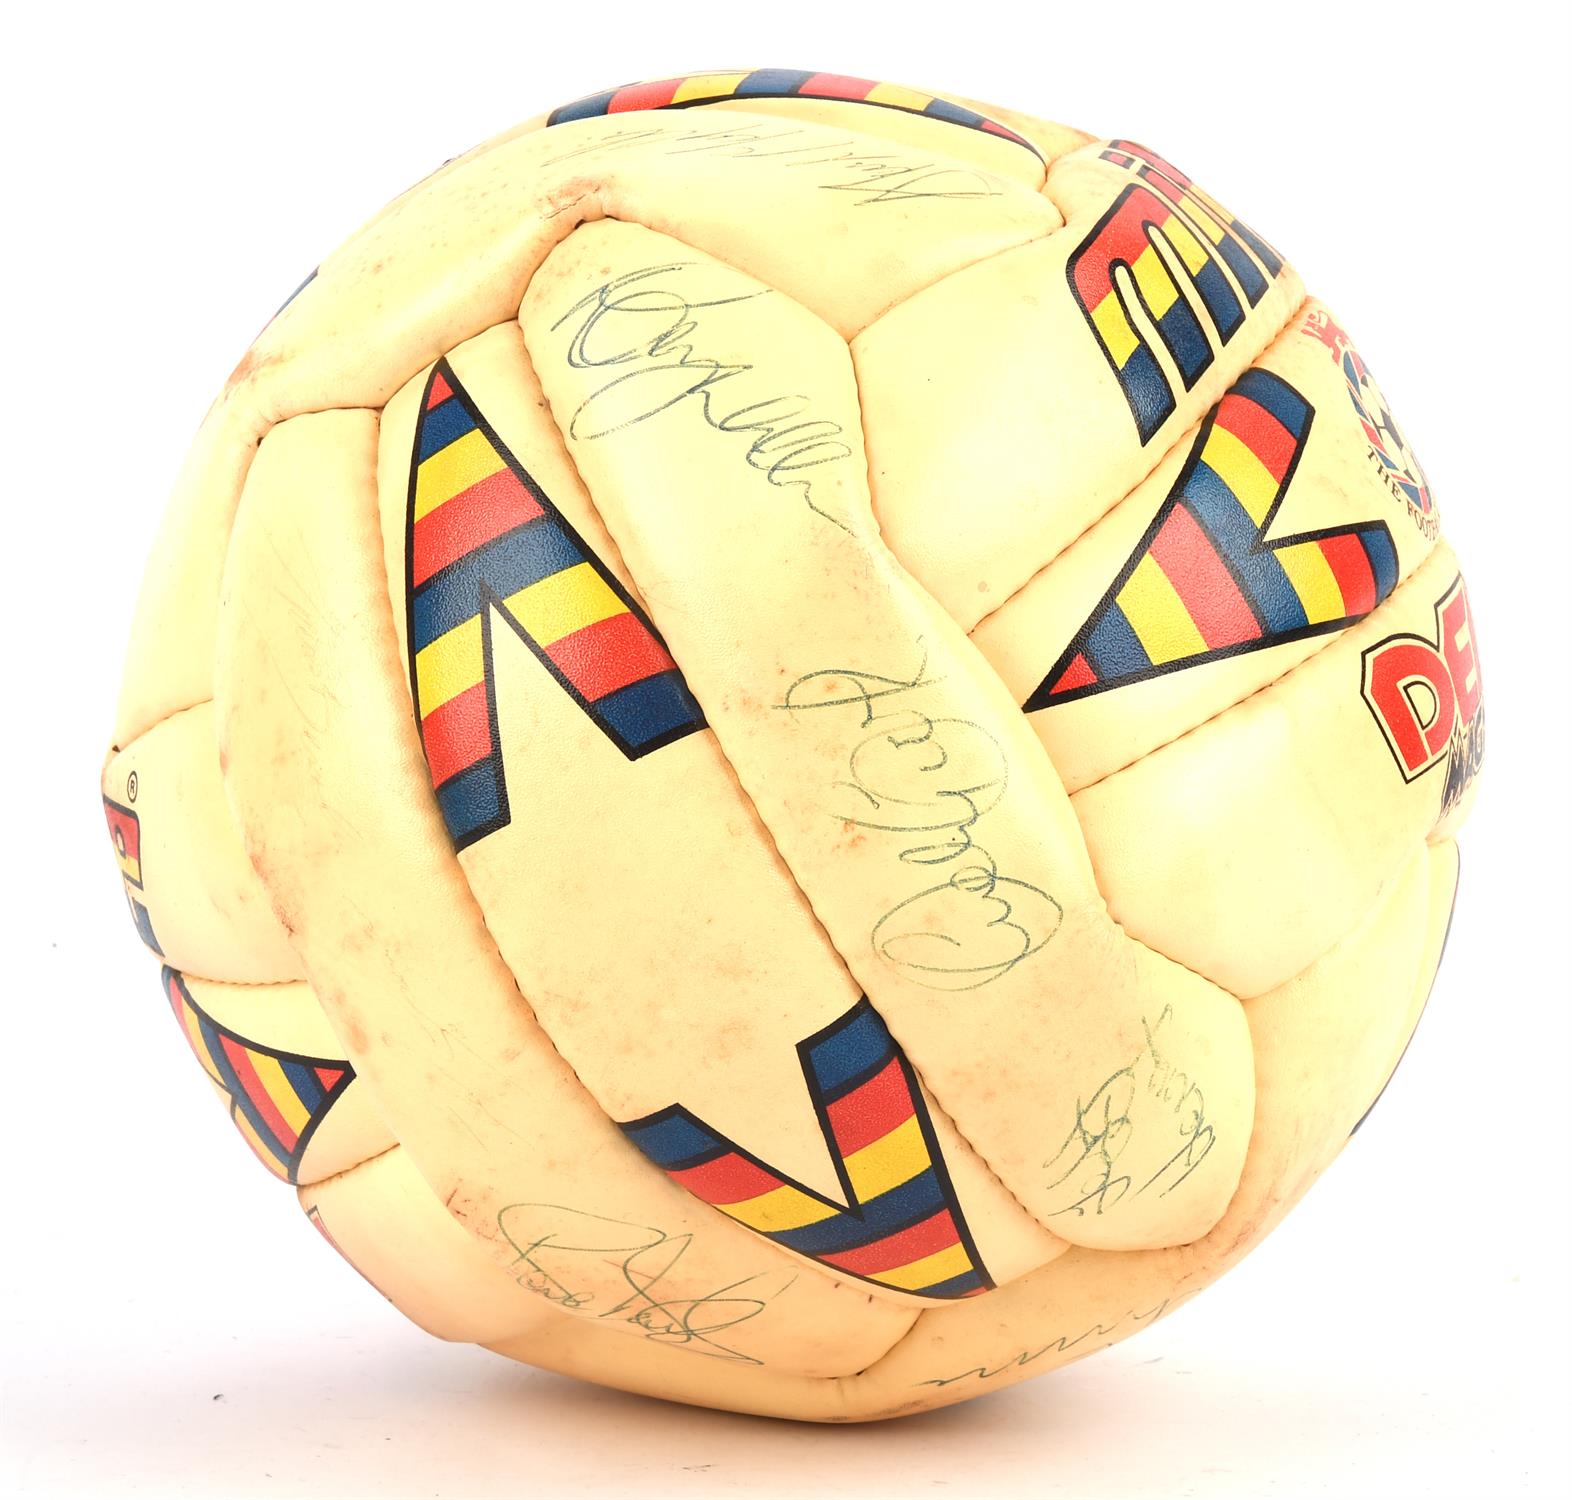 Football with various signatures / autographs. The ball is a Mitre Delta Magnum circa early 1990s. - Image 2 of 2